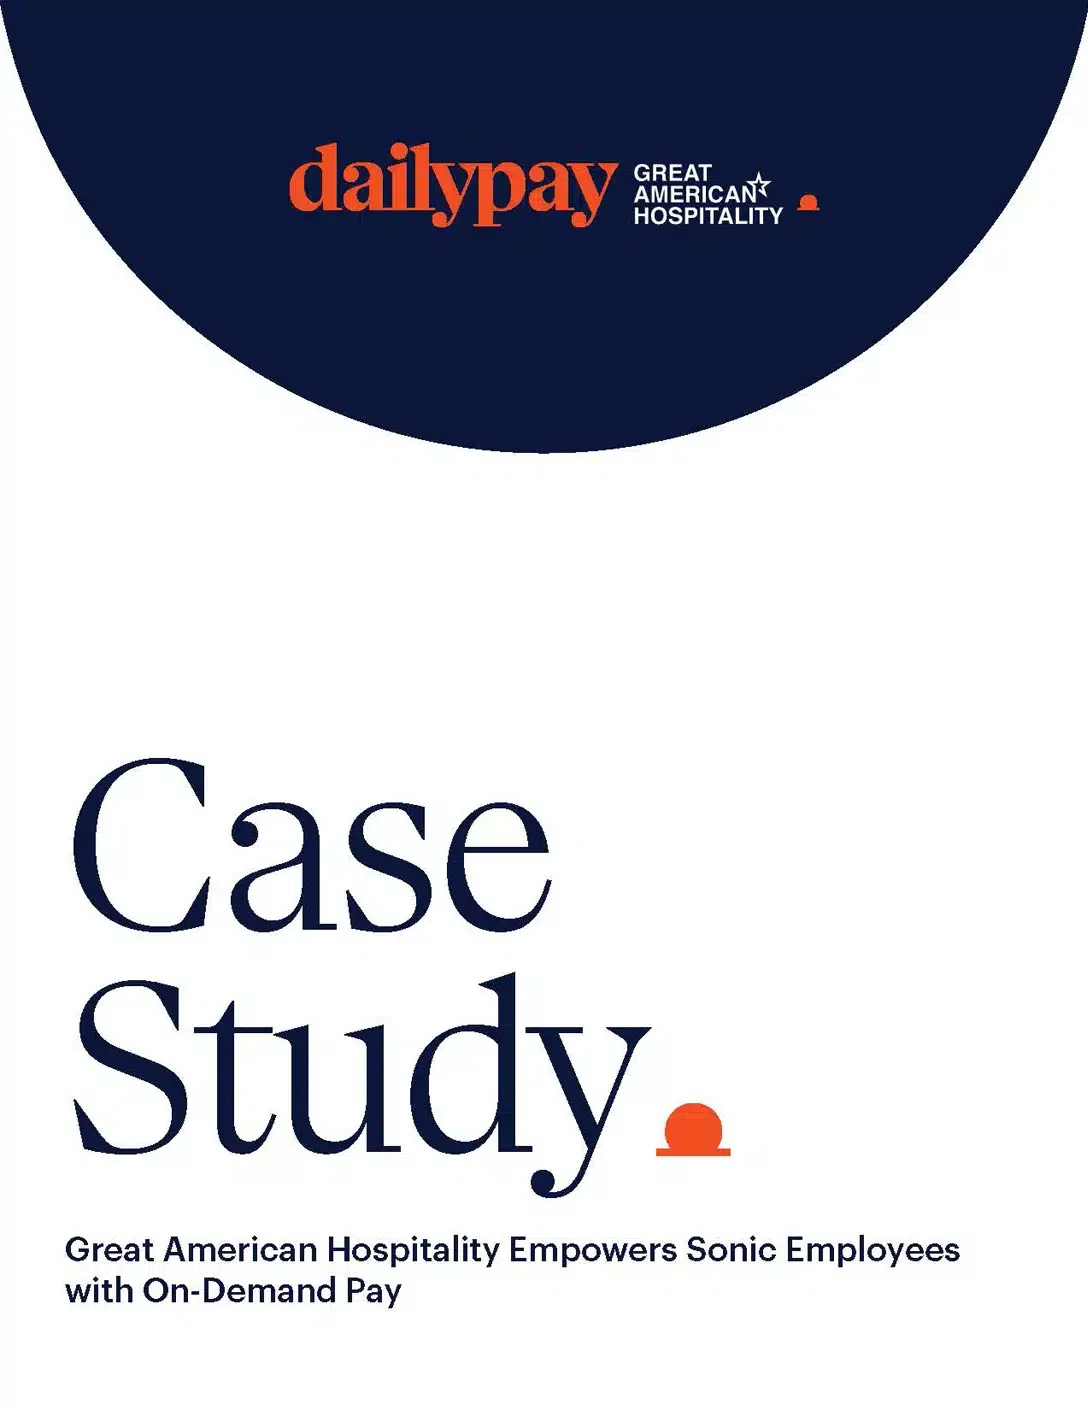 Cover page of a case study titled "Great American Hospitality Empowers Sonic Employees with On-Demand Pay," featuring the DailyPay and Great American Hospitality logos.